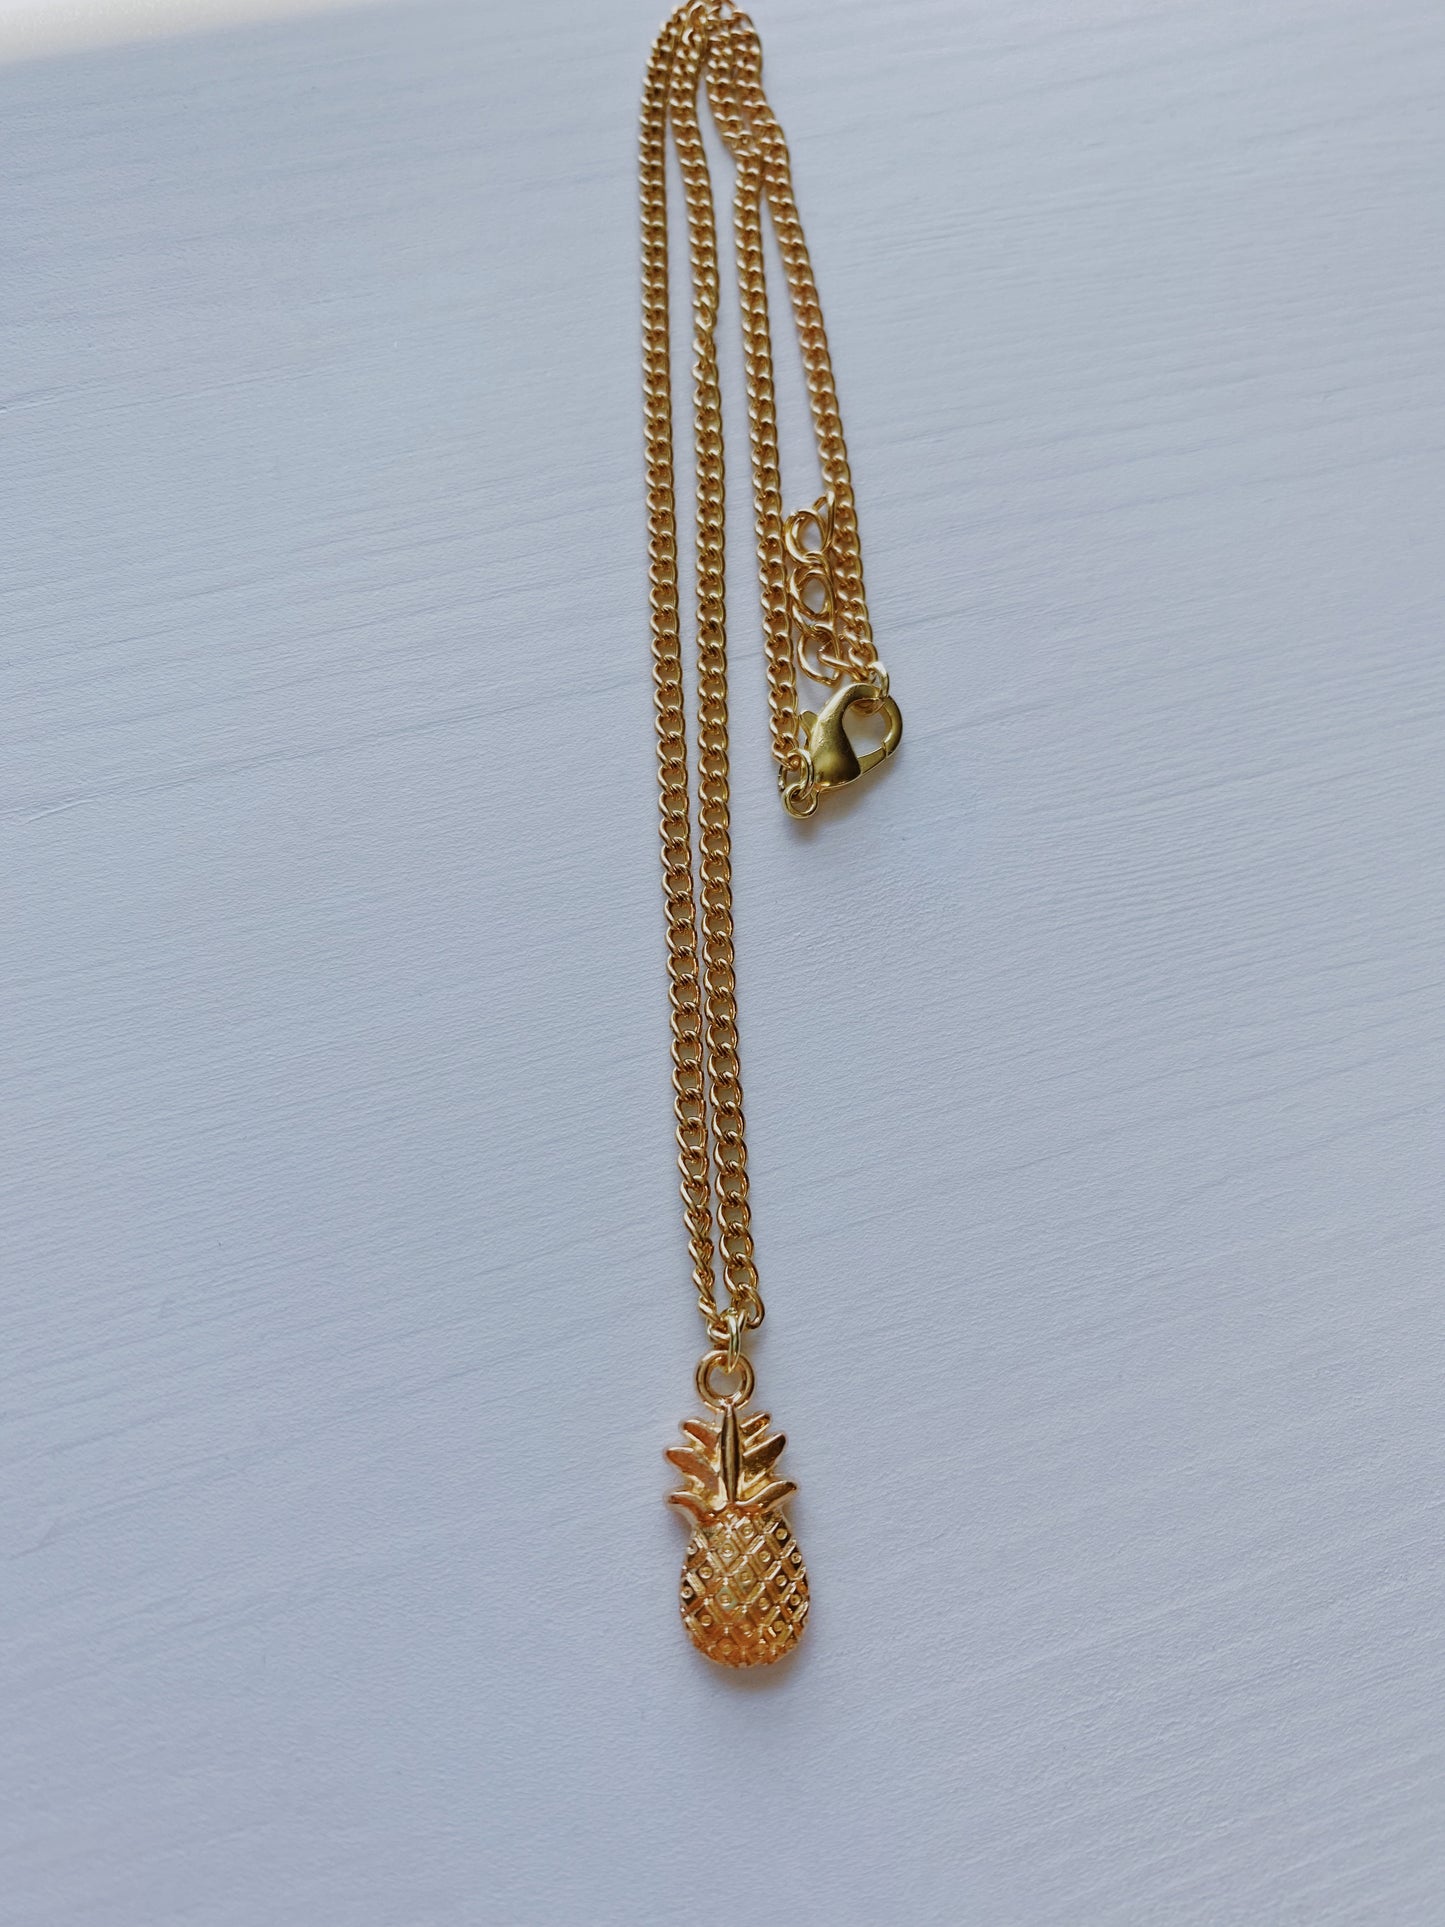 Pineapple charm necklace